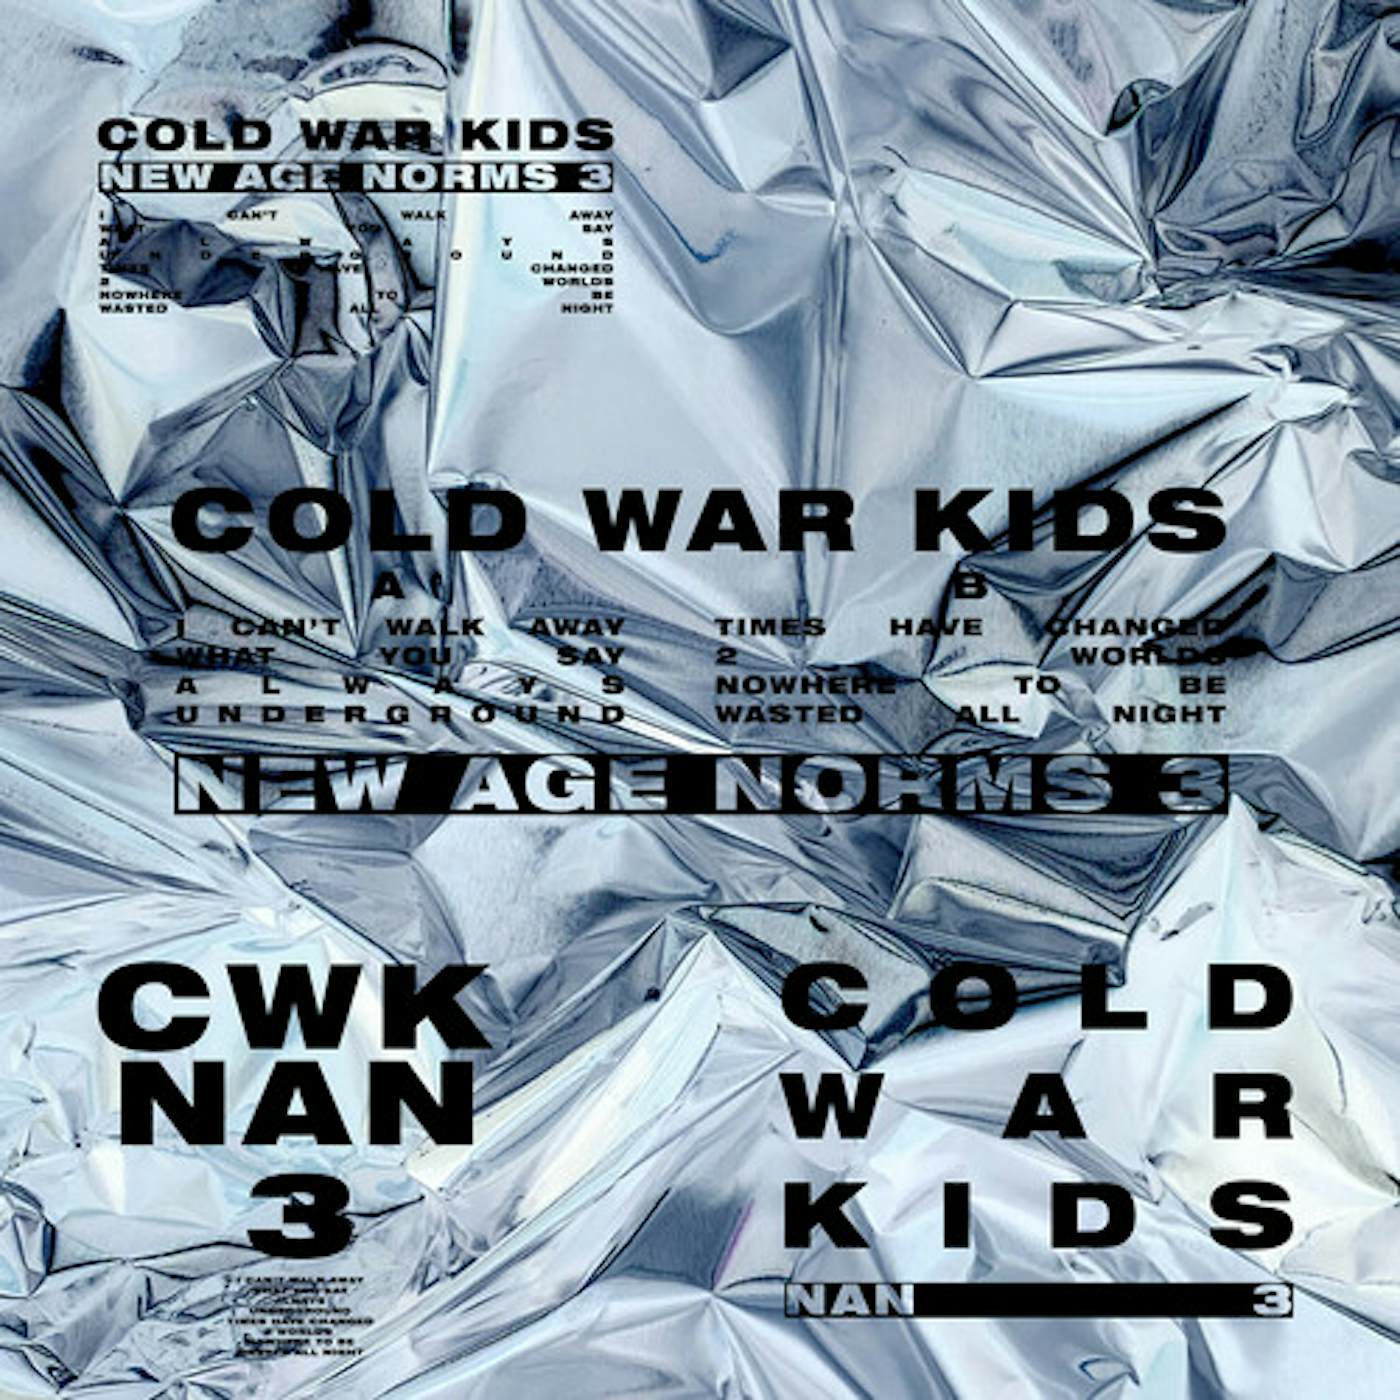 Cold War Kids NEW AGE NORMS 3 CD